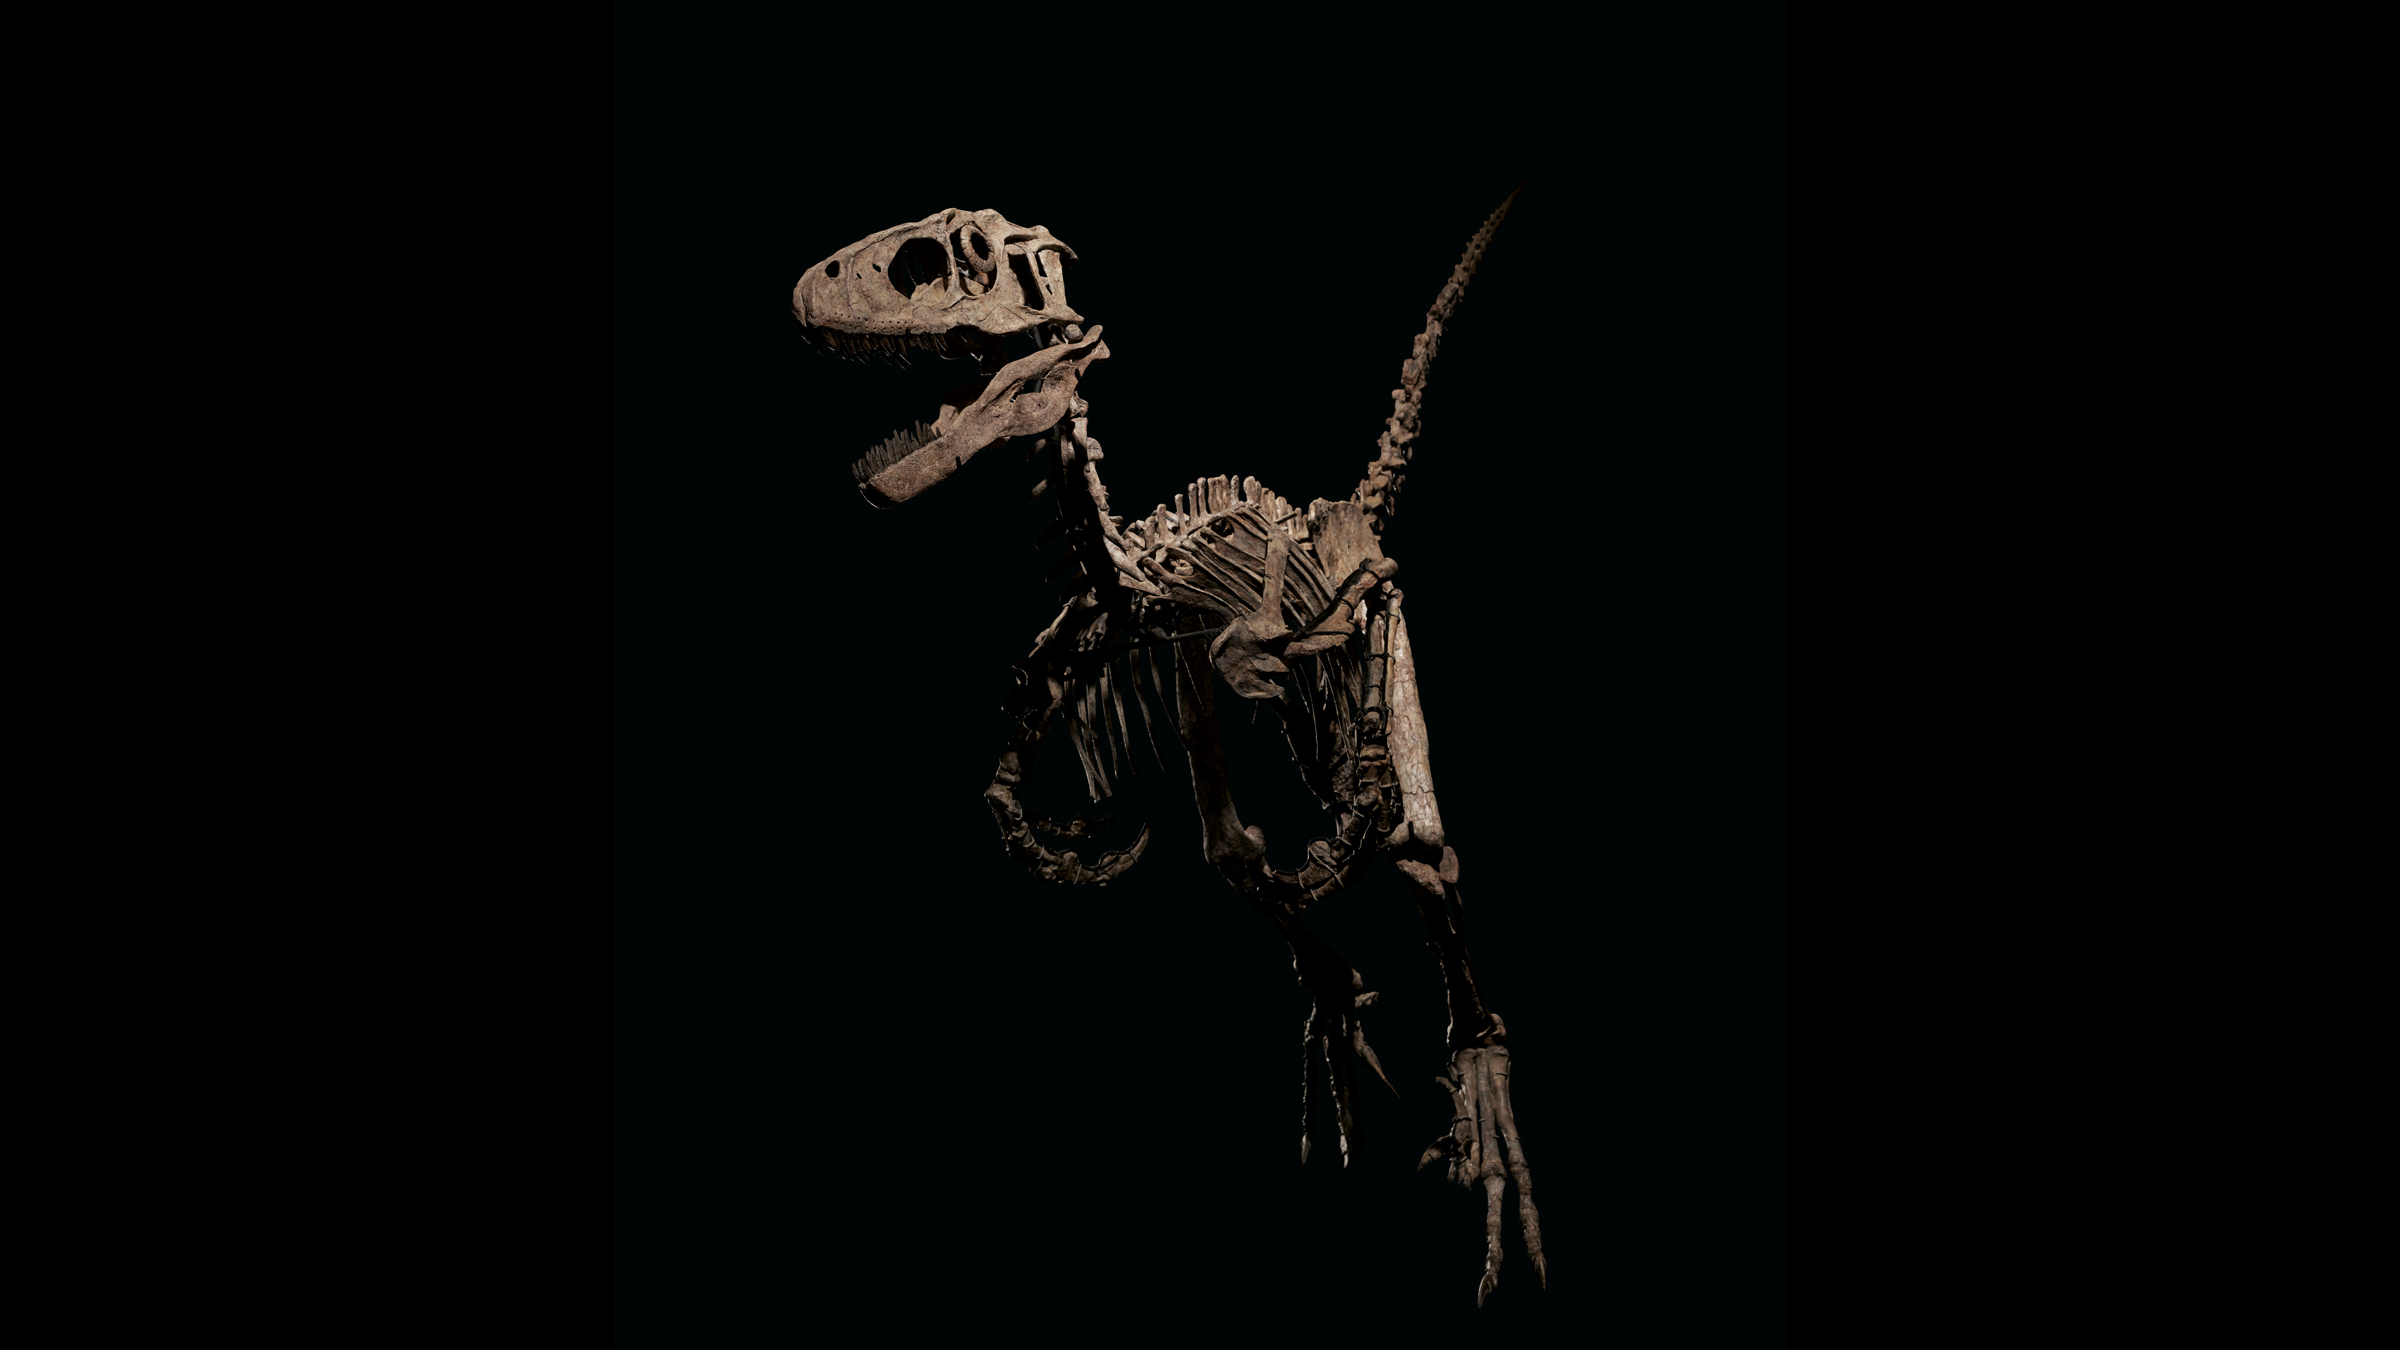 A photo of an entire Deinonychus skeleton. Deinonychus lived in North America during the Cretaceous period.